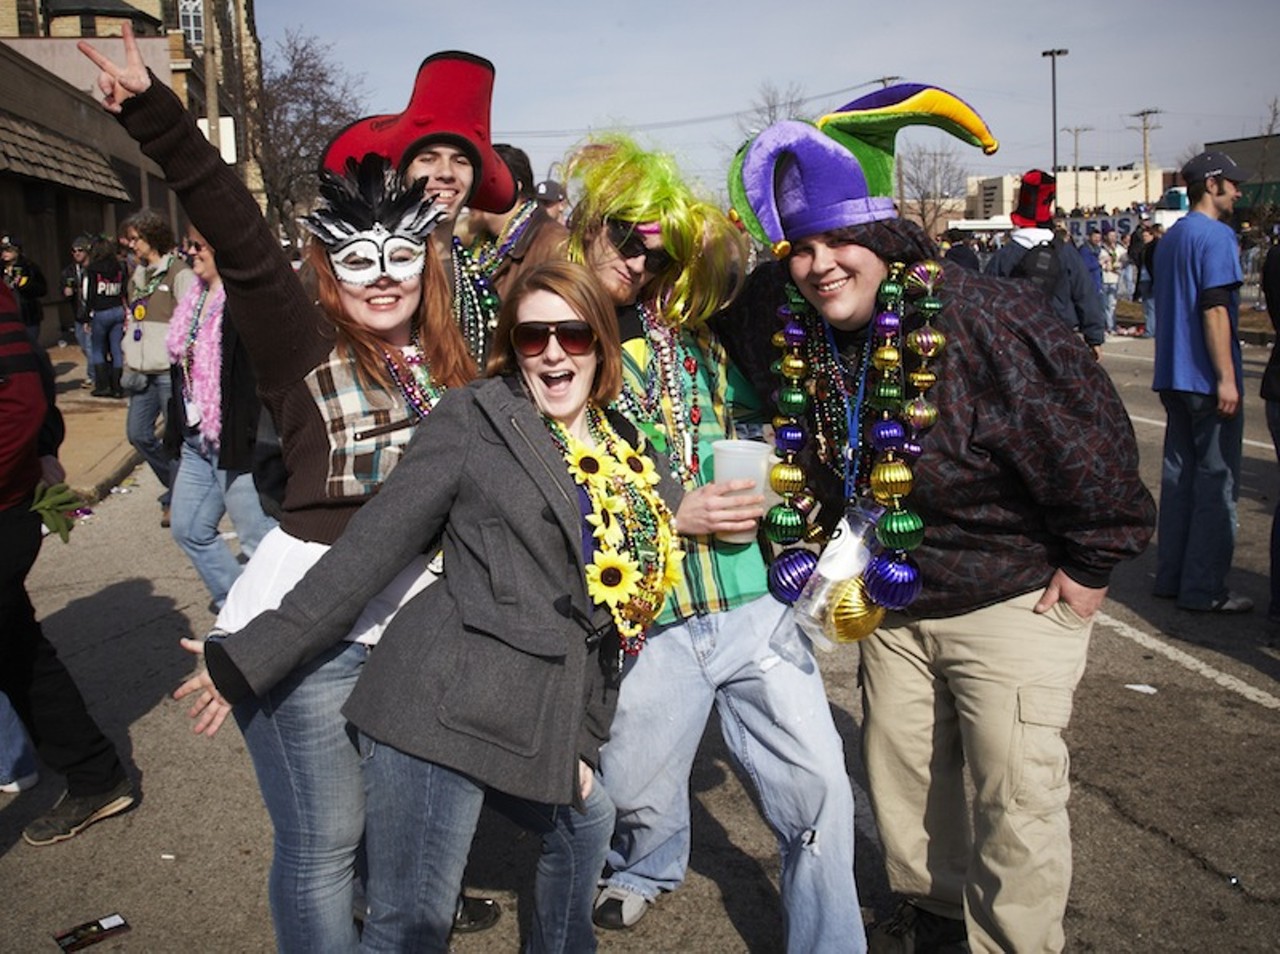 2012 Mardi Gras Costumes and Beads